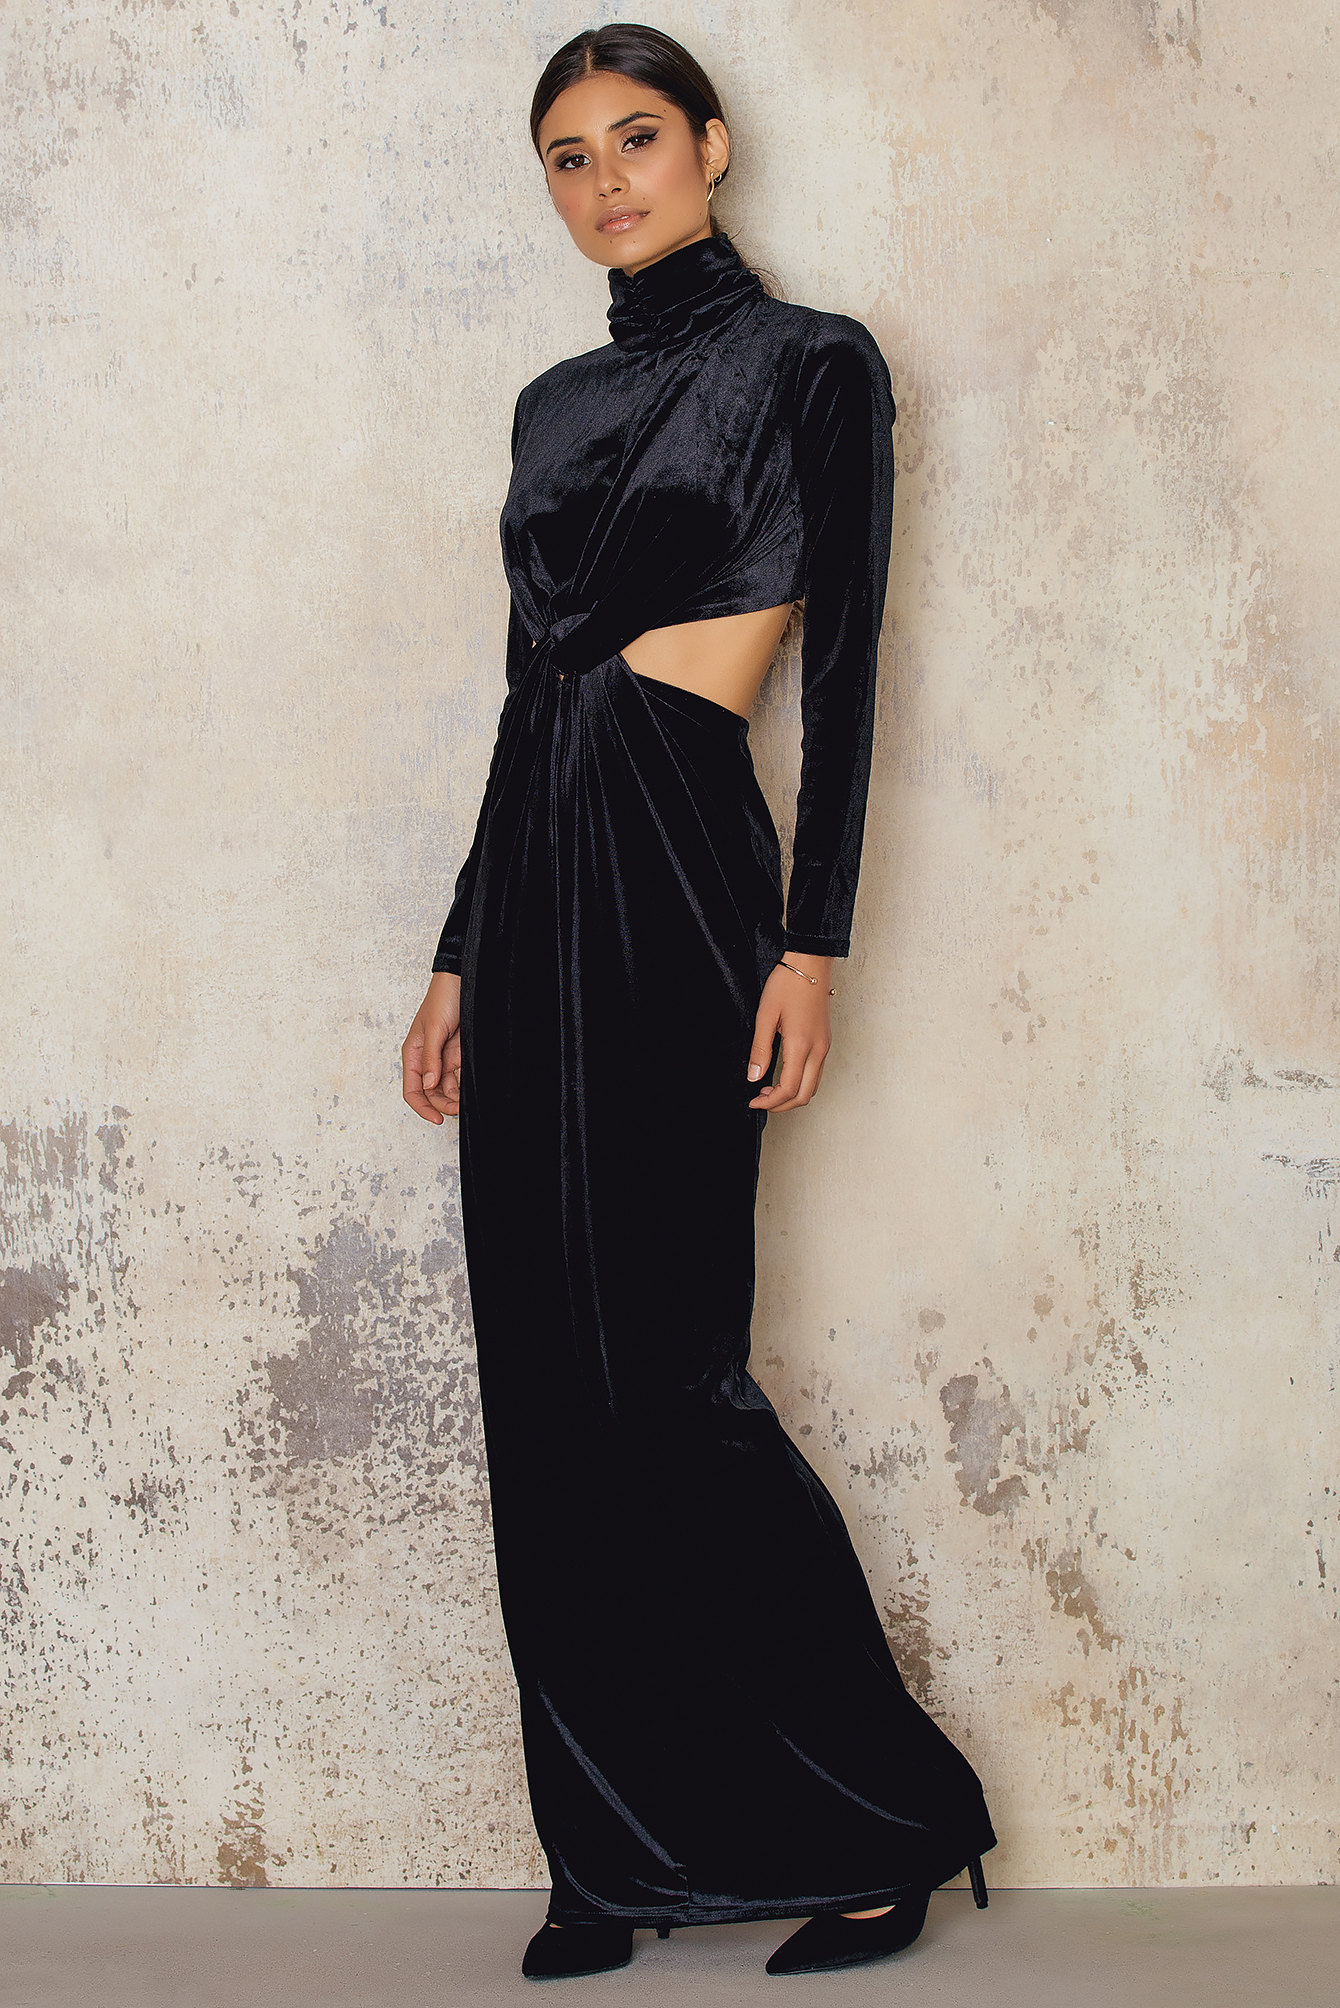 Discover more than 153 velvet high neck gown super hot